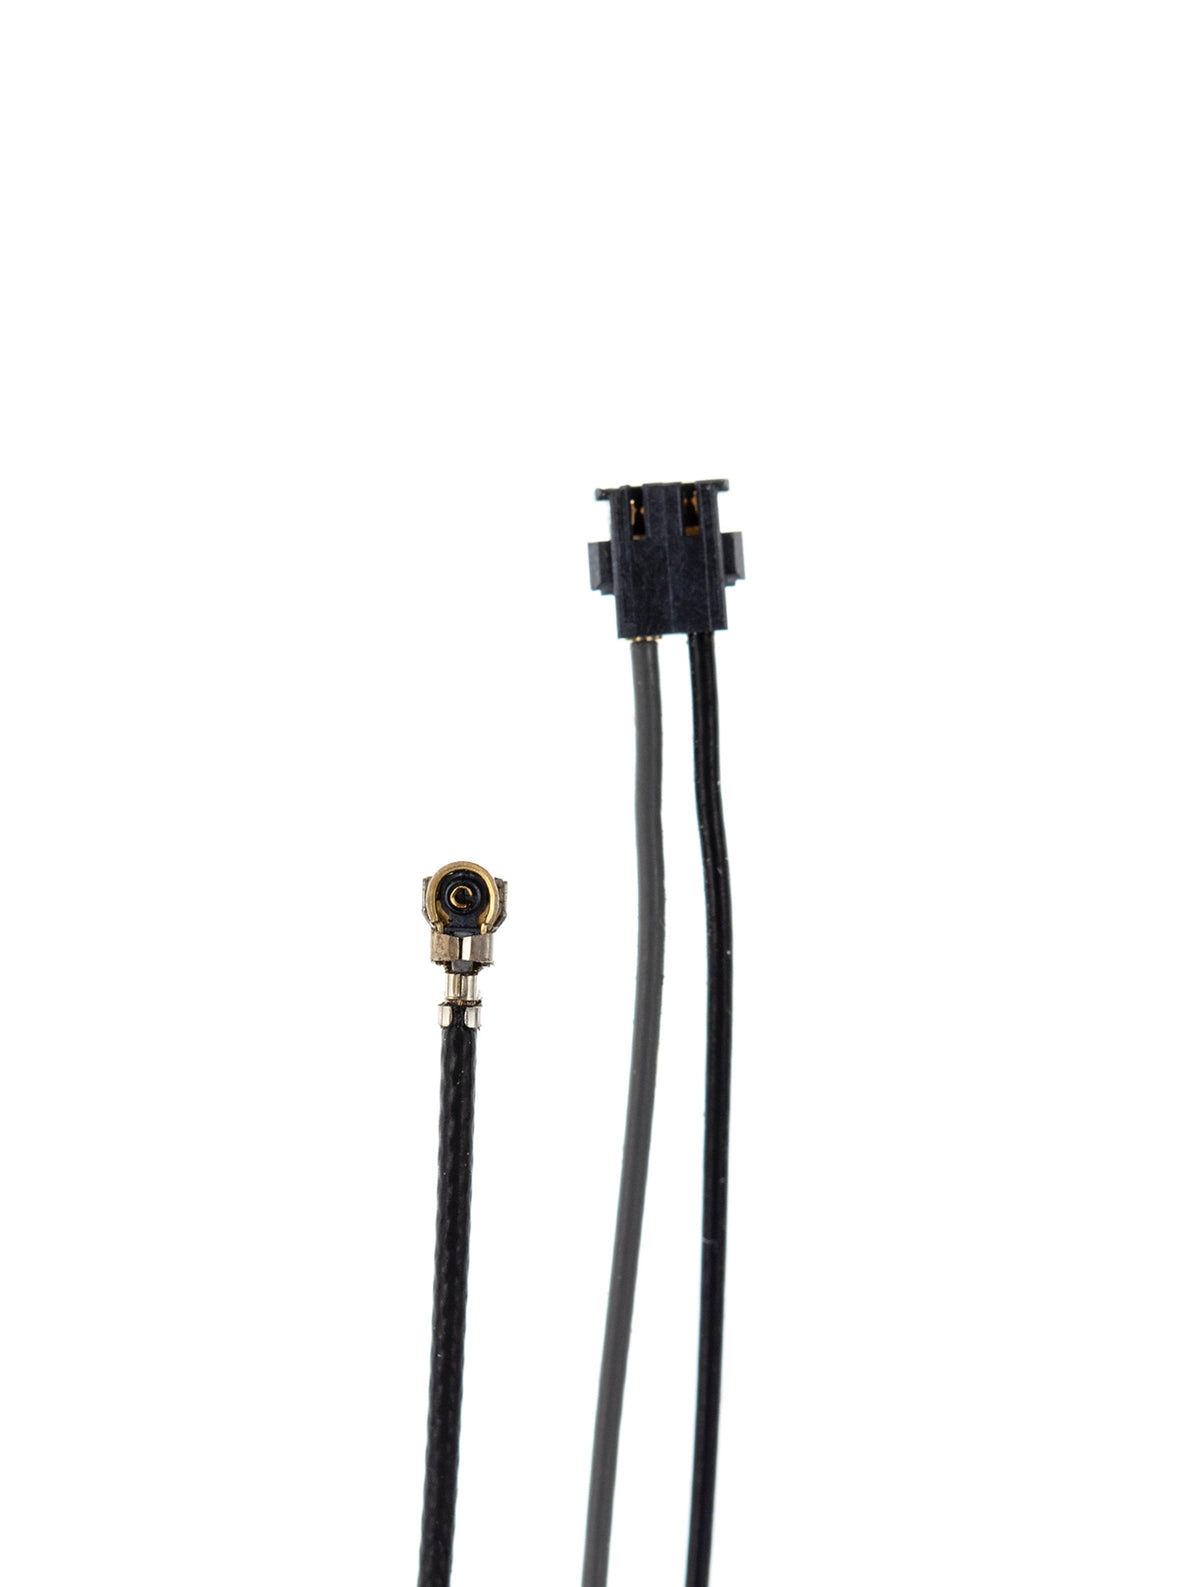 KEYBOARD FLEX CABLE FOR IPAD 10.2" 7TH/8TH/9TH